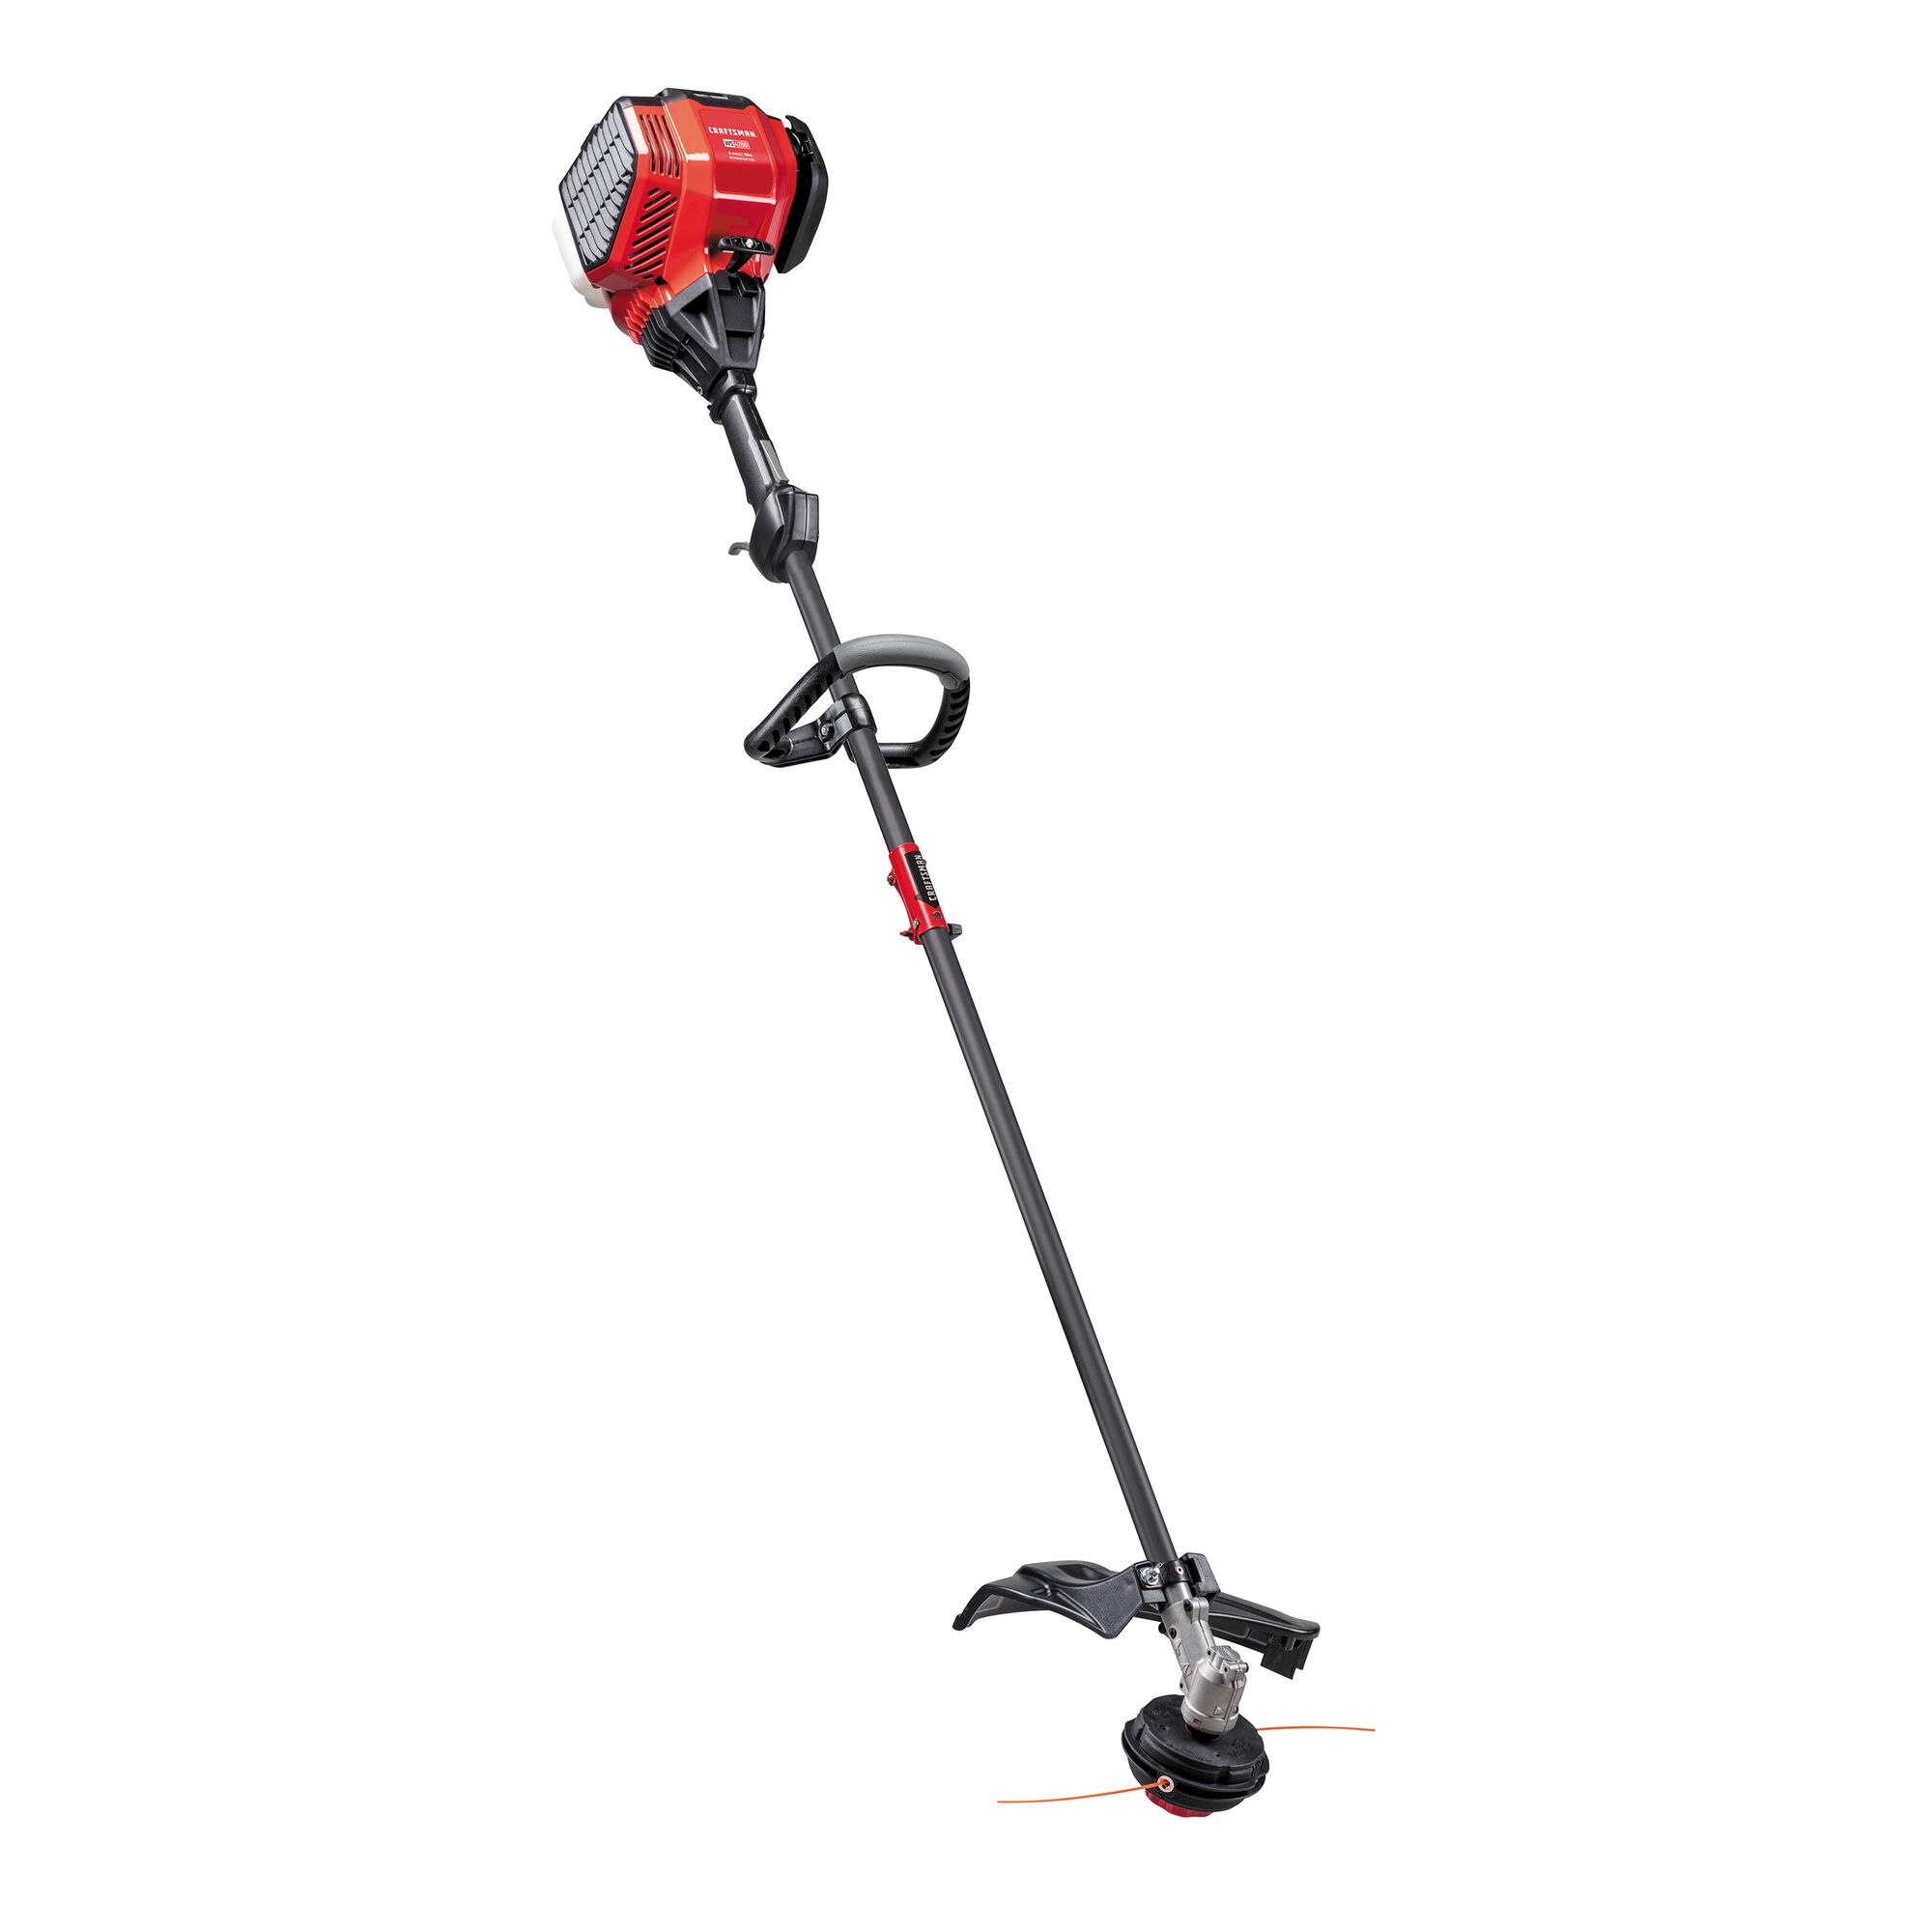 Left profile of  Weedwacker 30 C C 4 cycle 17 inch attachment capable straight shaft gas trimmer.